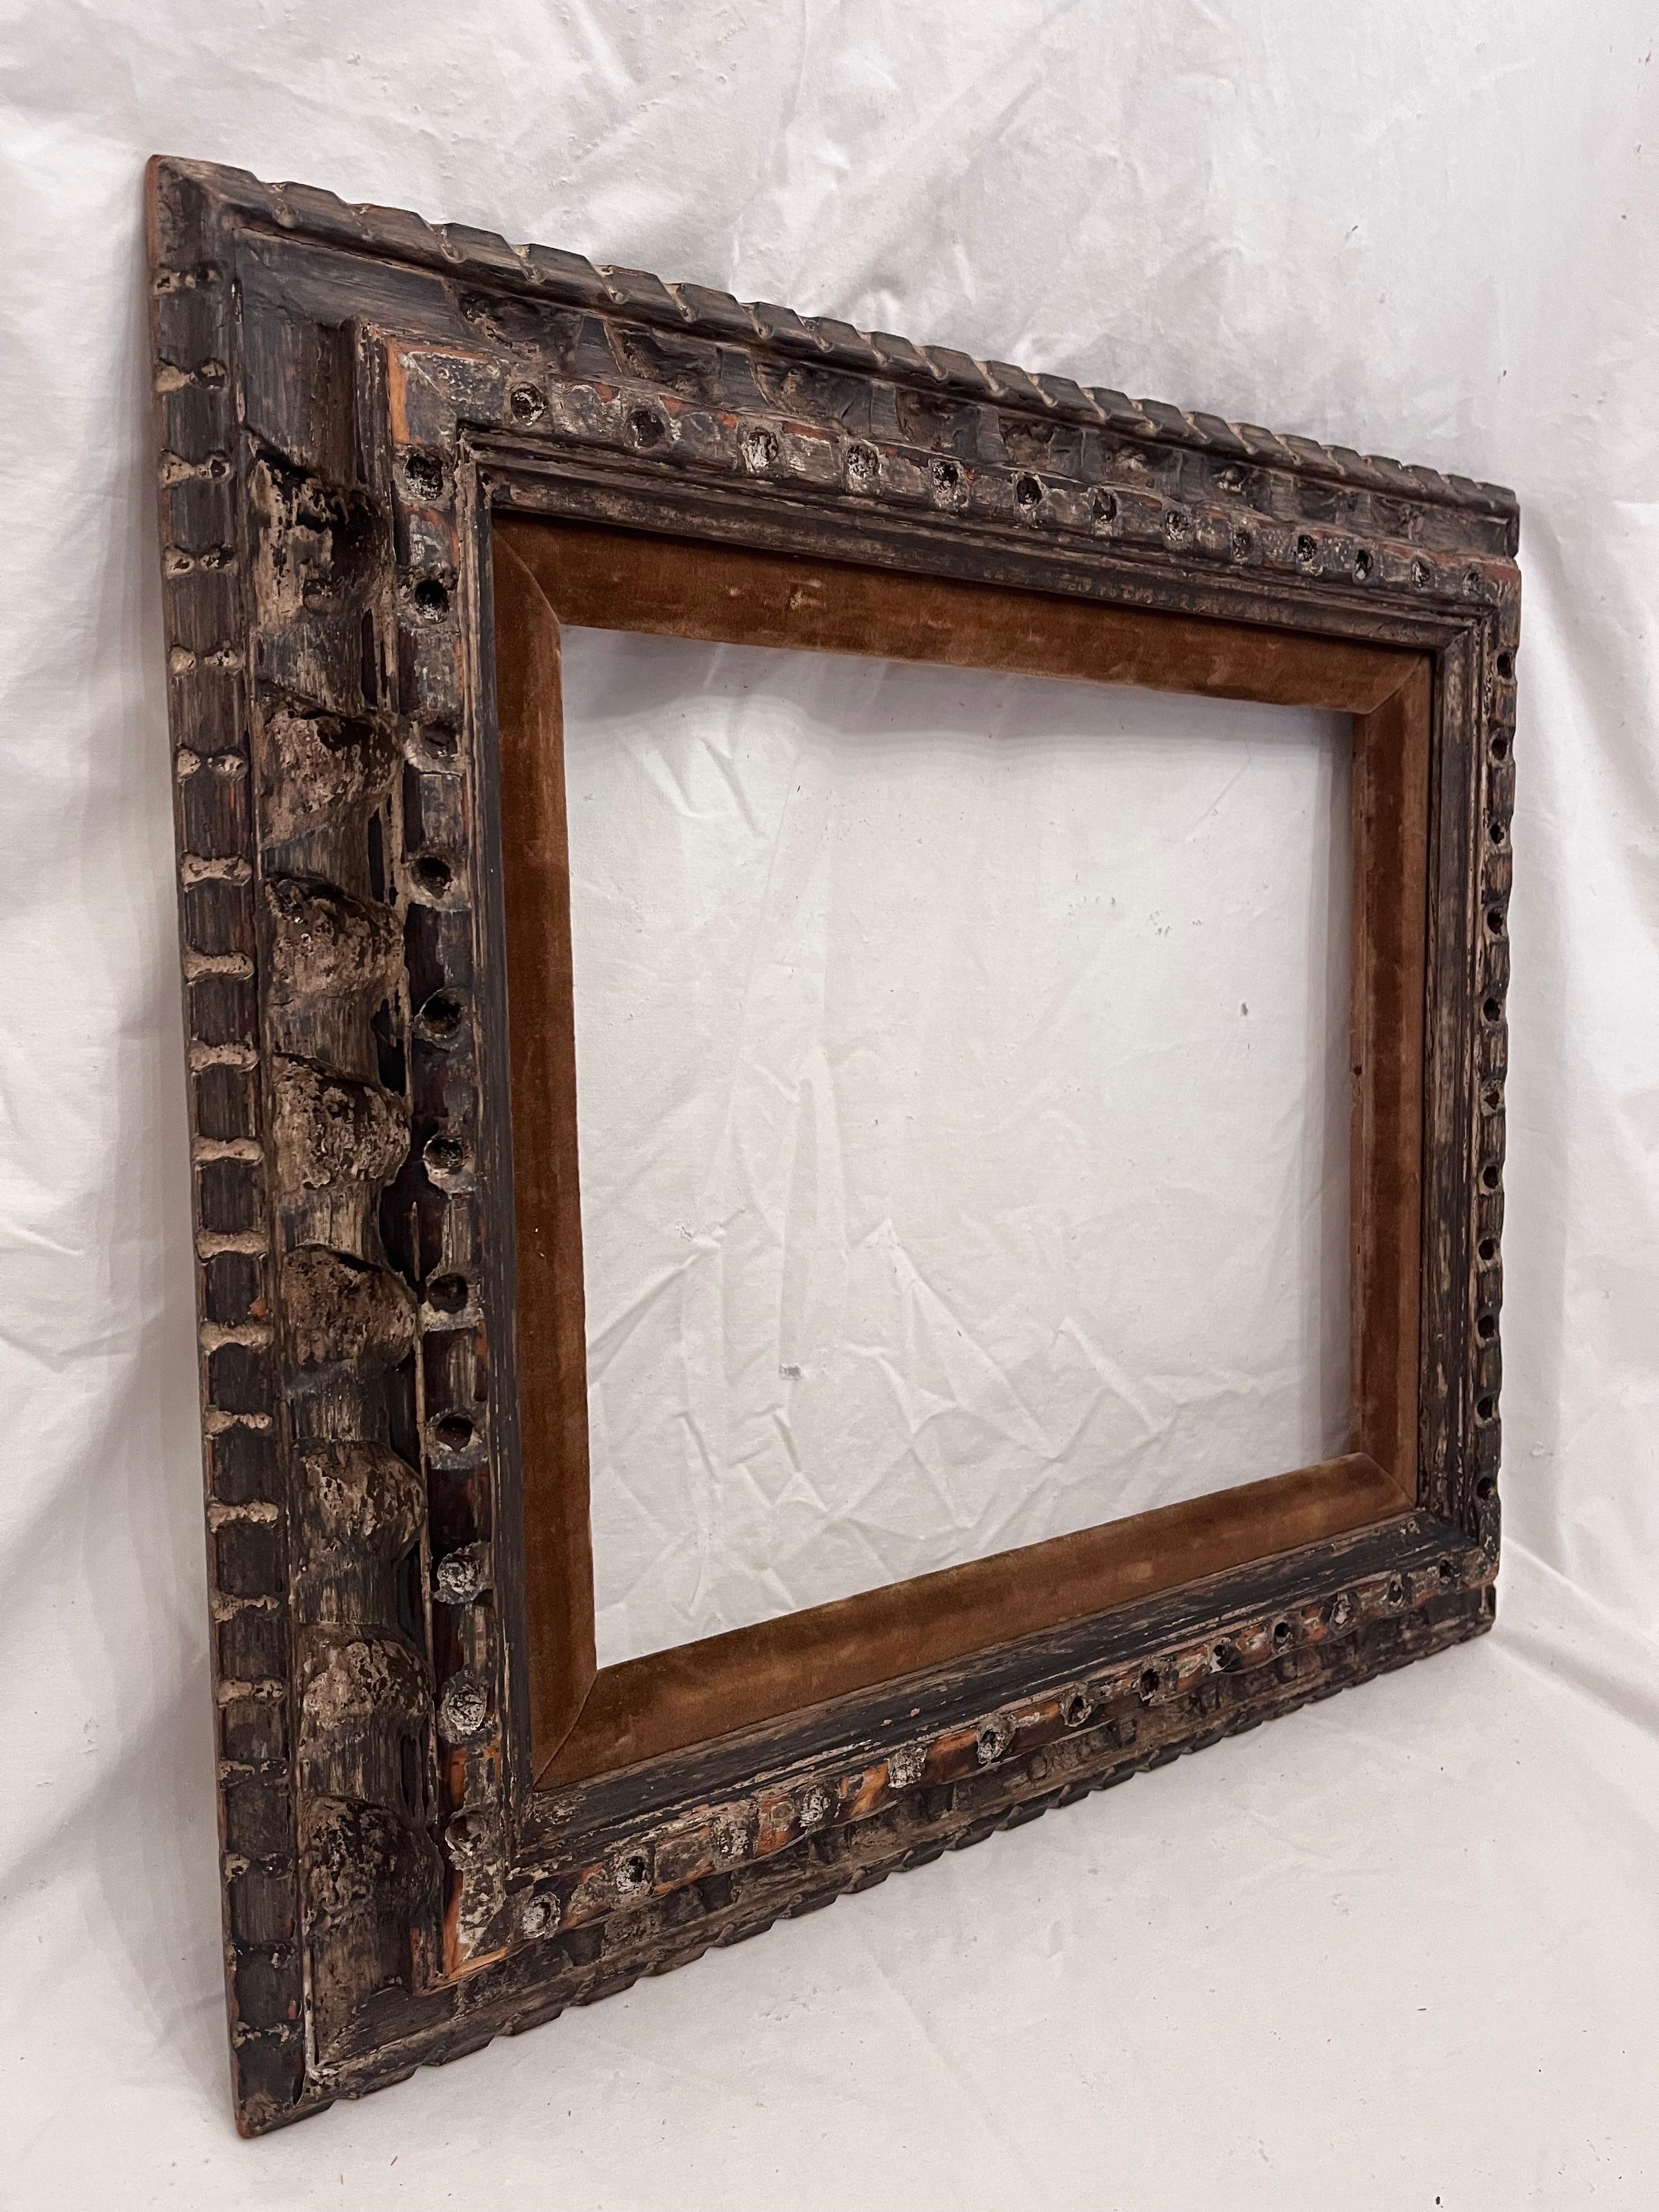 A beautiful and vintage early to mid 20th century circa 1940's American Modernist style hand carved, finished corner picture frame. The rabbet size (size that holds the art) is 13.25